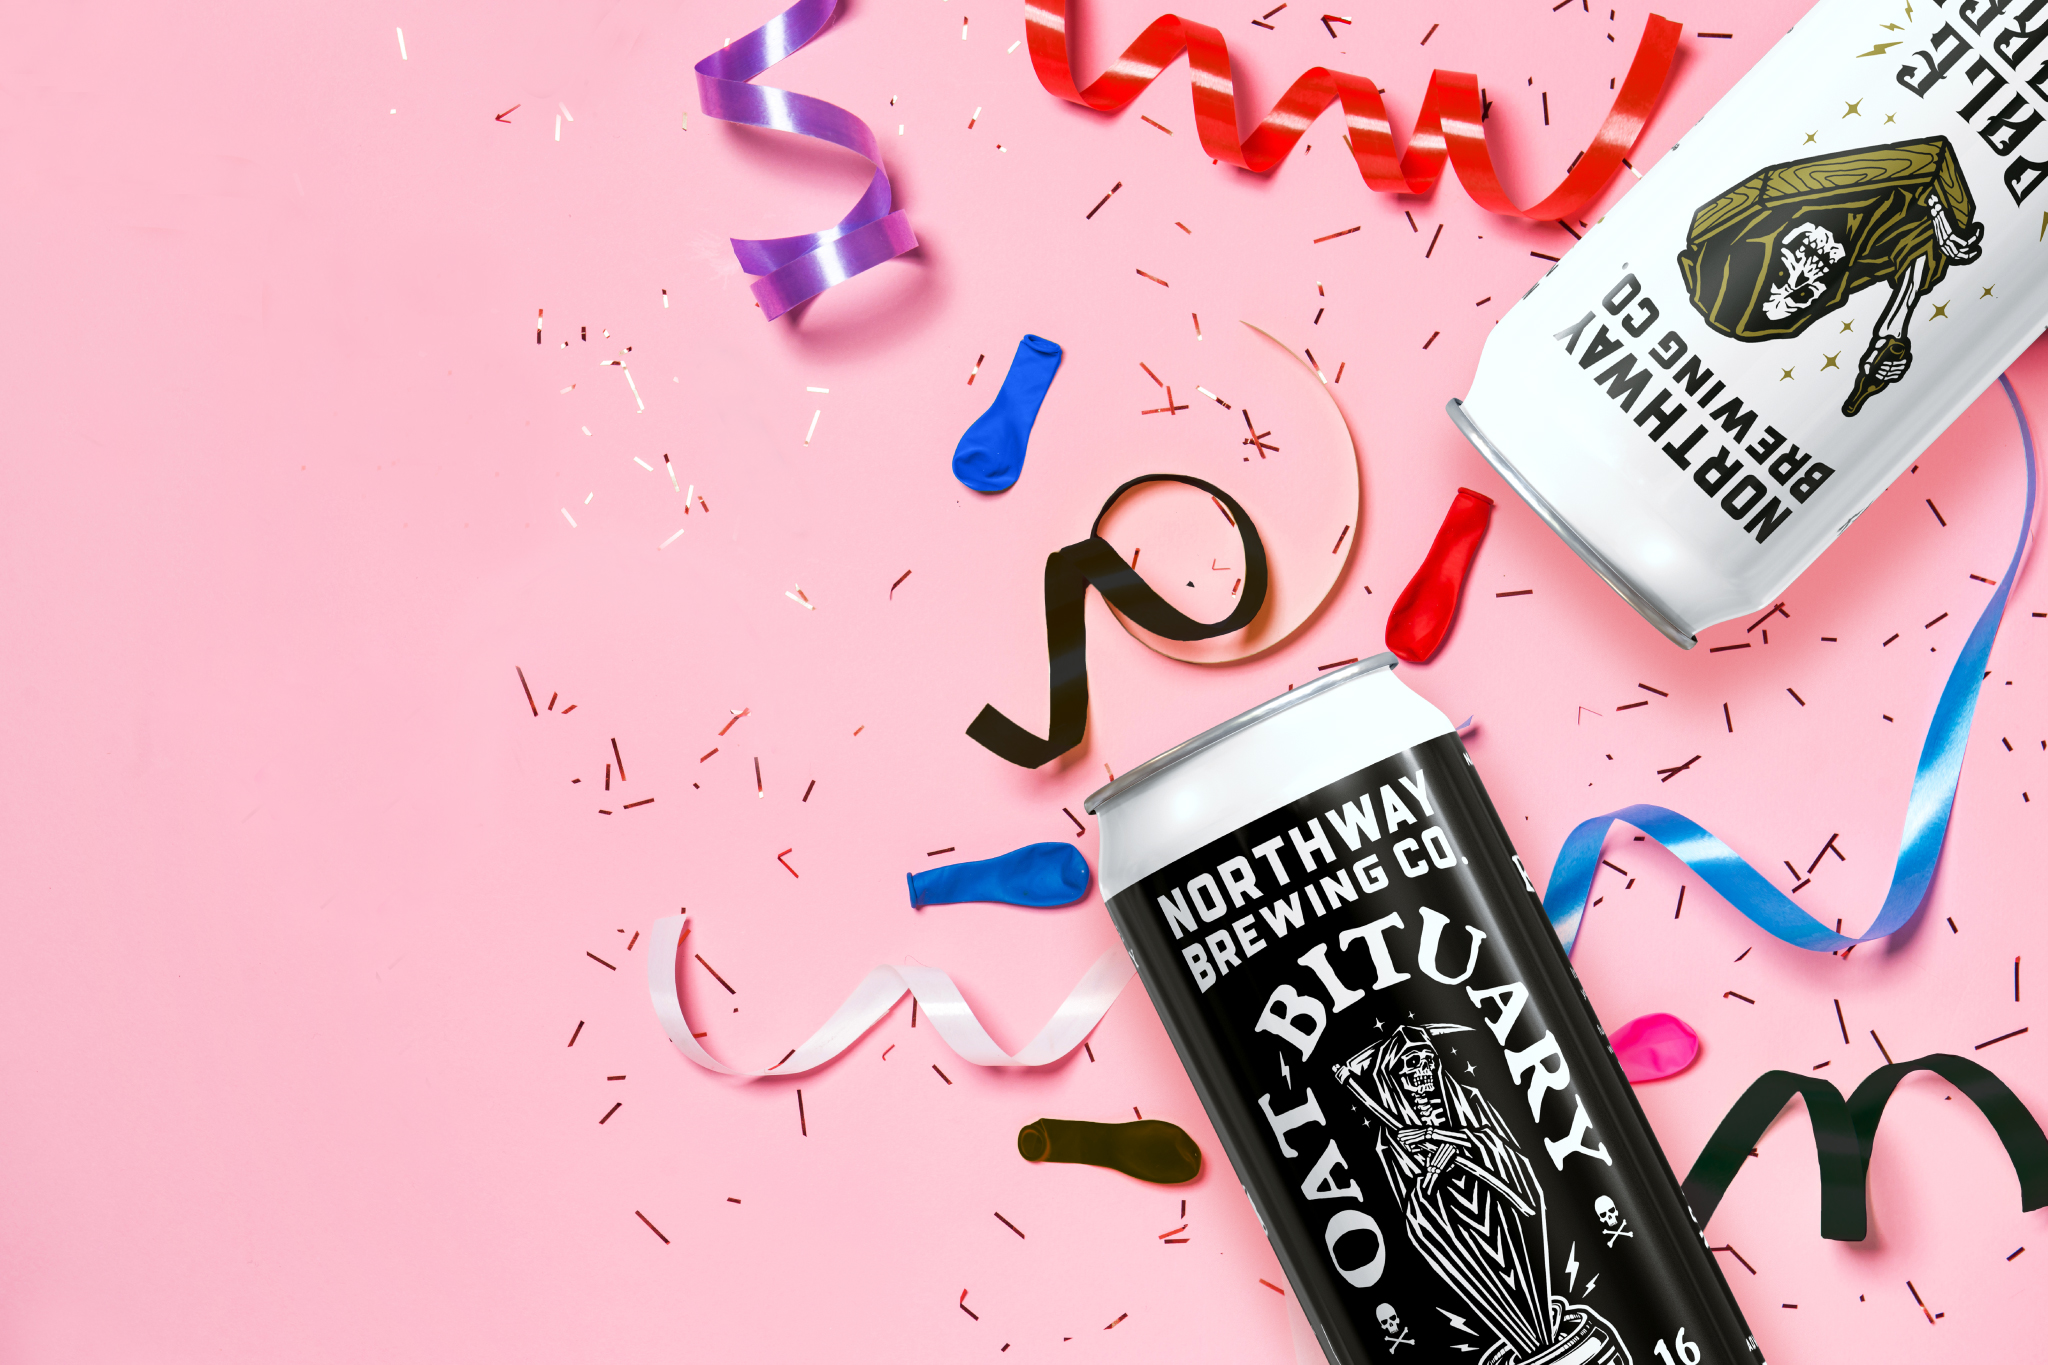 Northway Brewing Co. cans on a pink surface with confetti and deflated balloons.